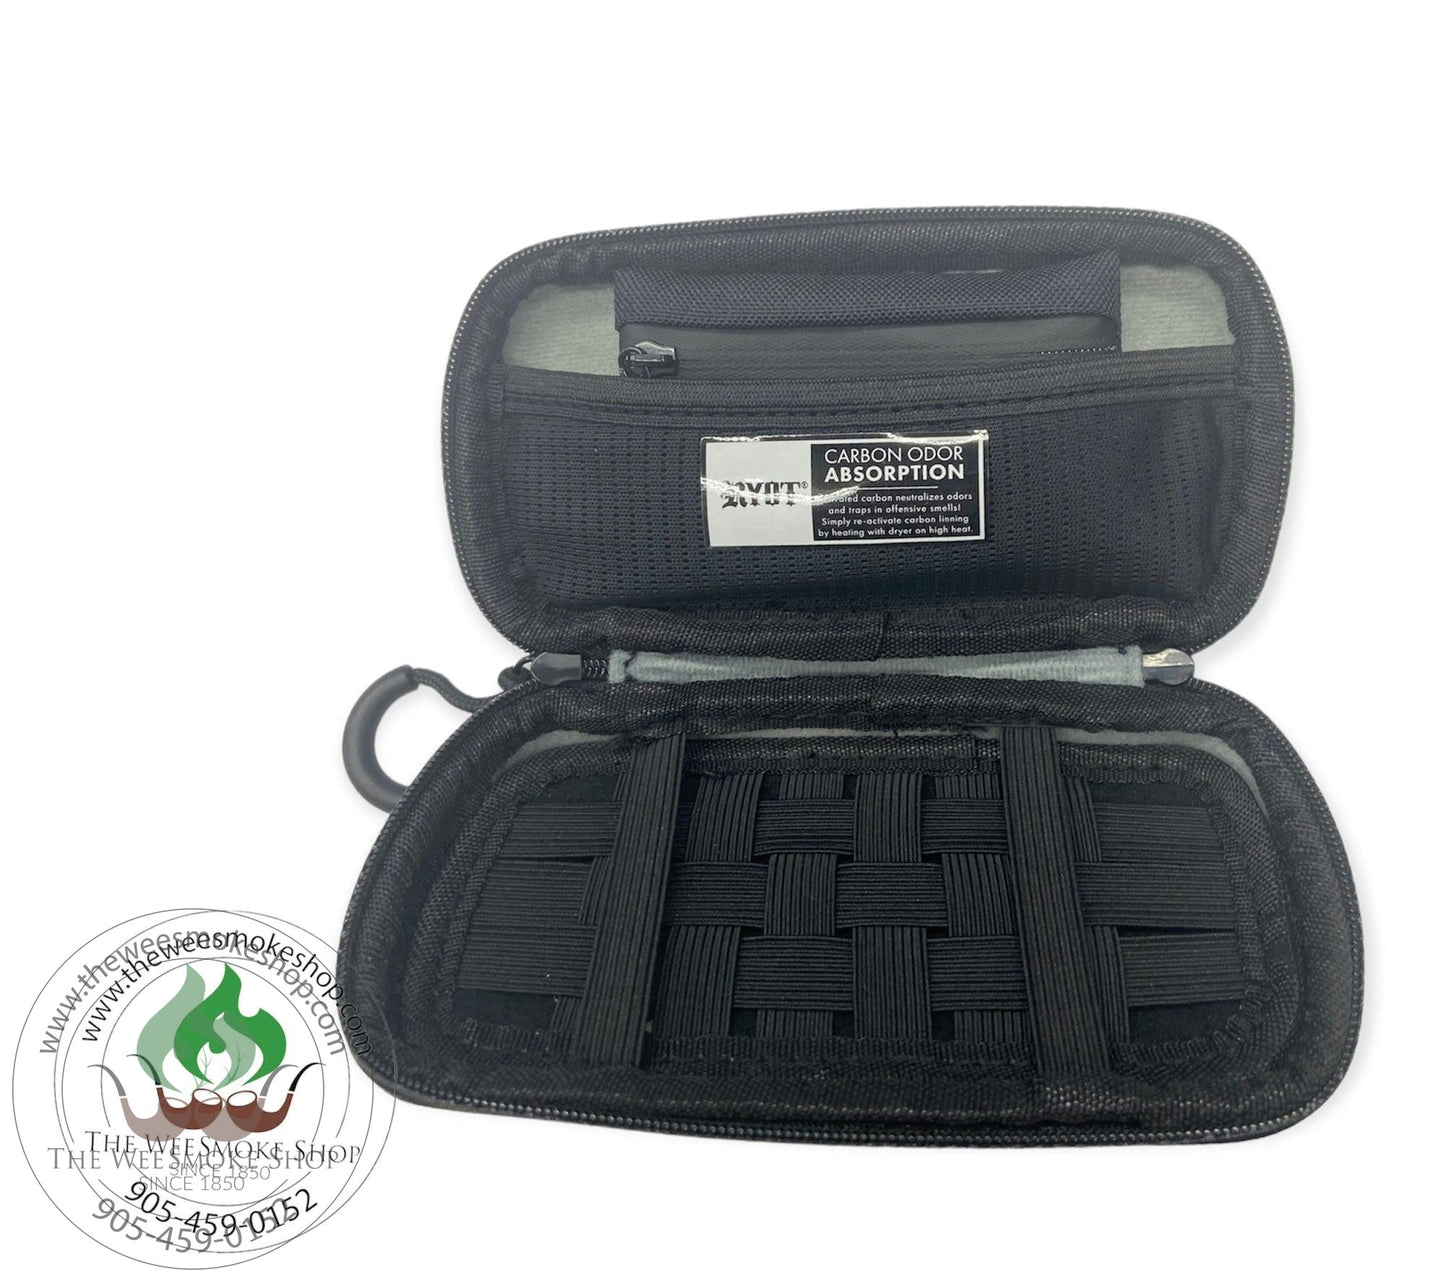 RYOT Slym Smell Safe Carbon Case - storage container - the wee smoke shop